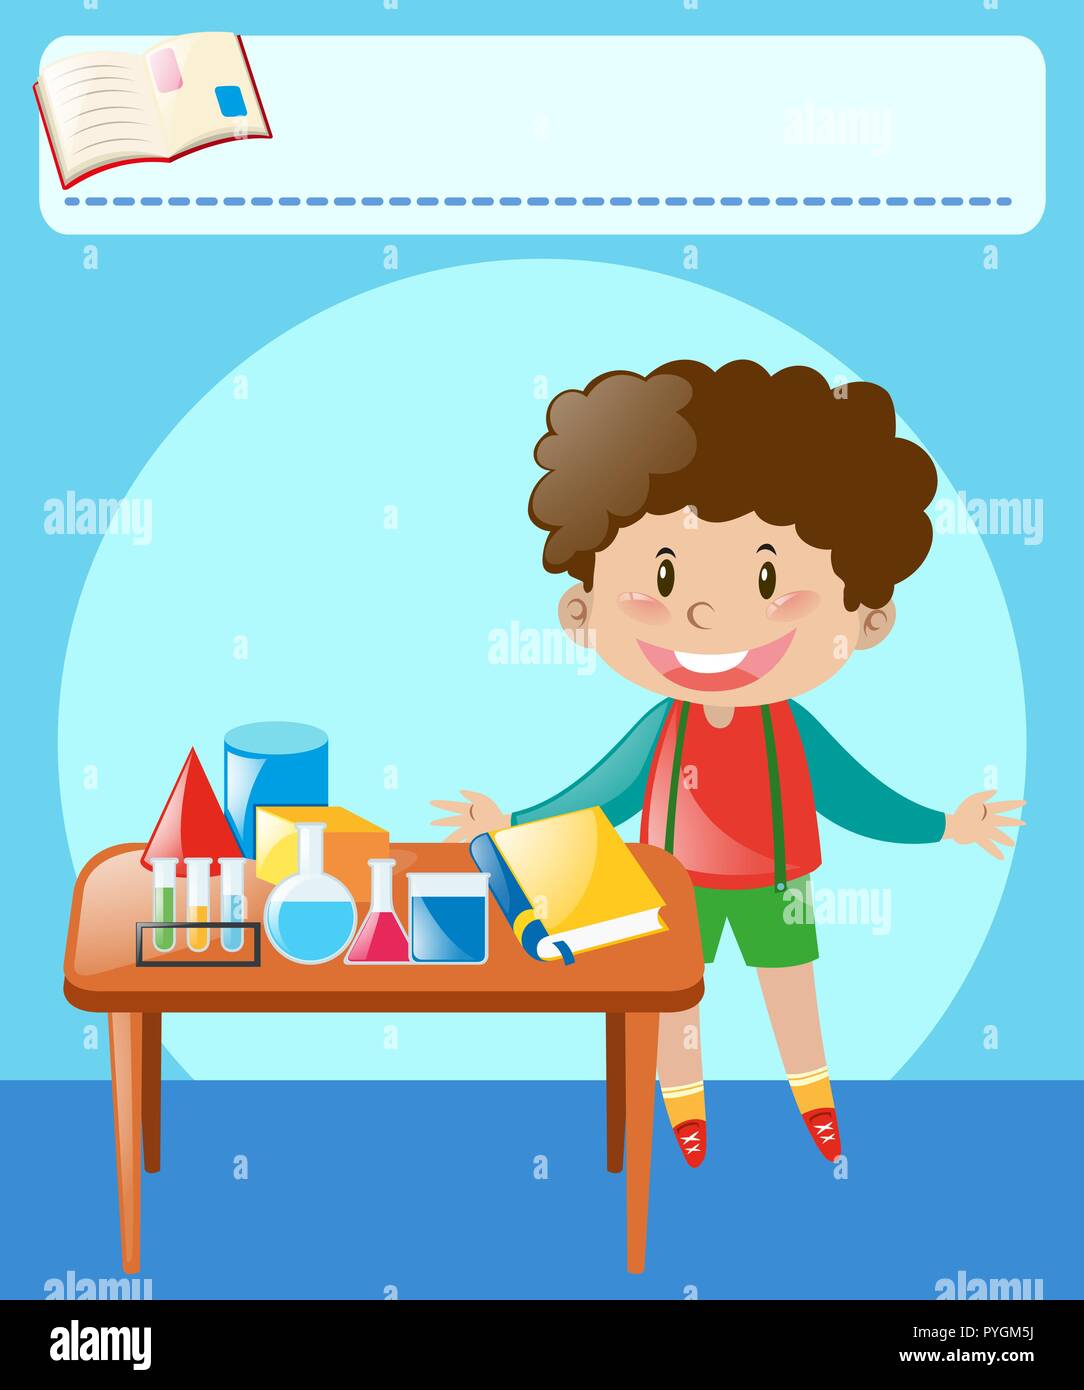 Little boy doing experiment in classroom illustration Stock Vector